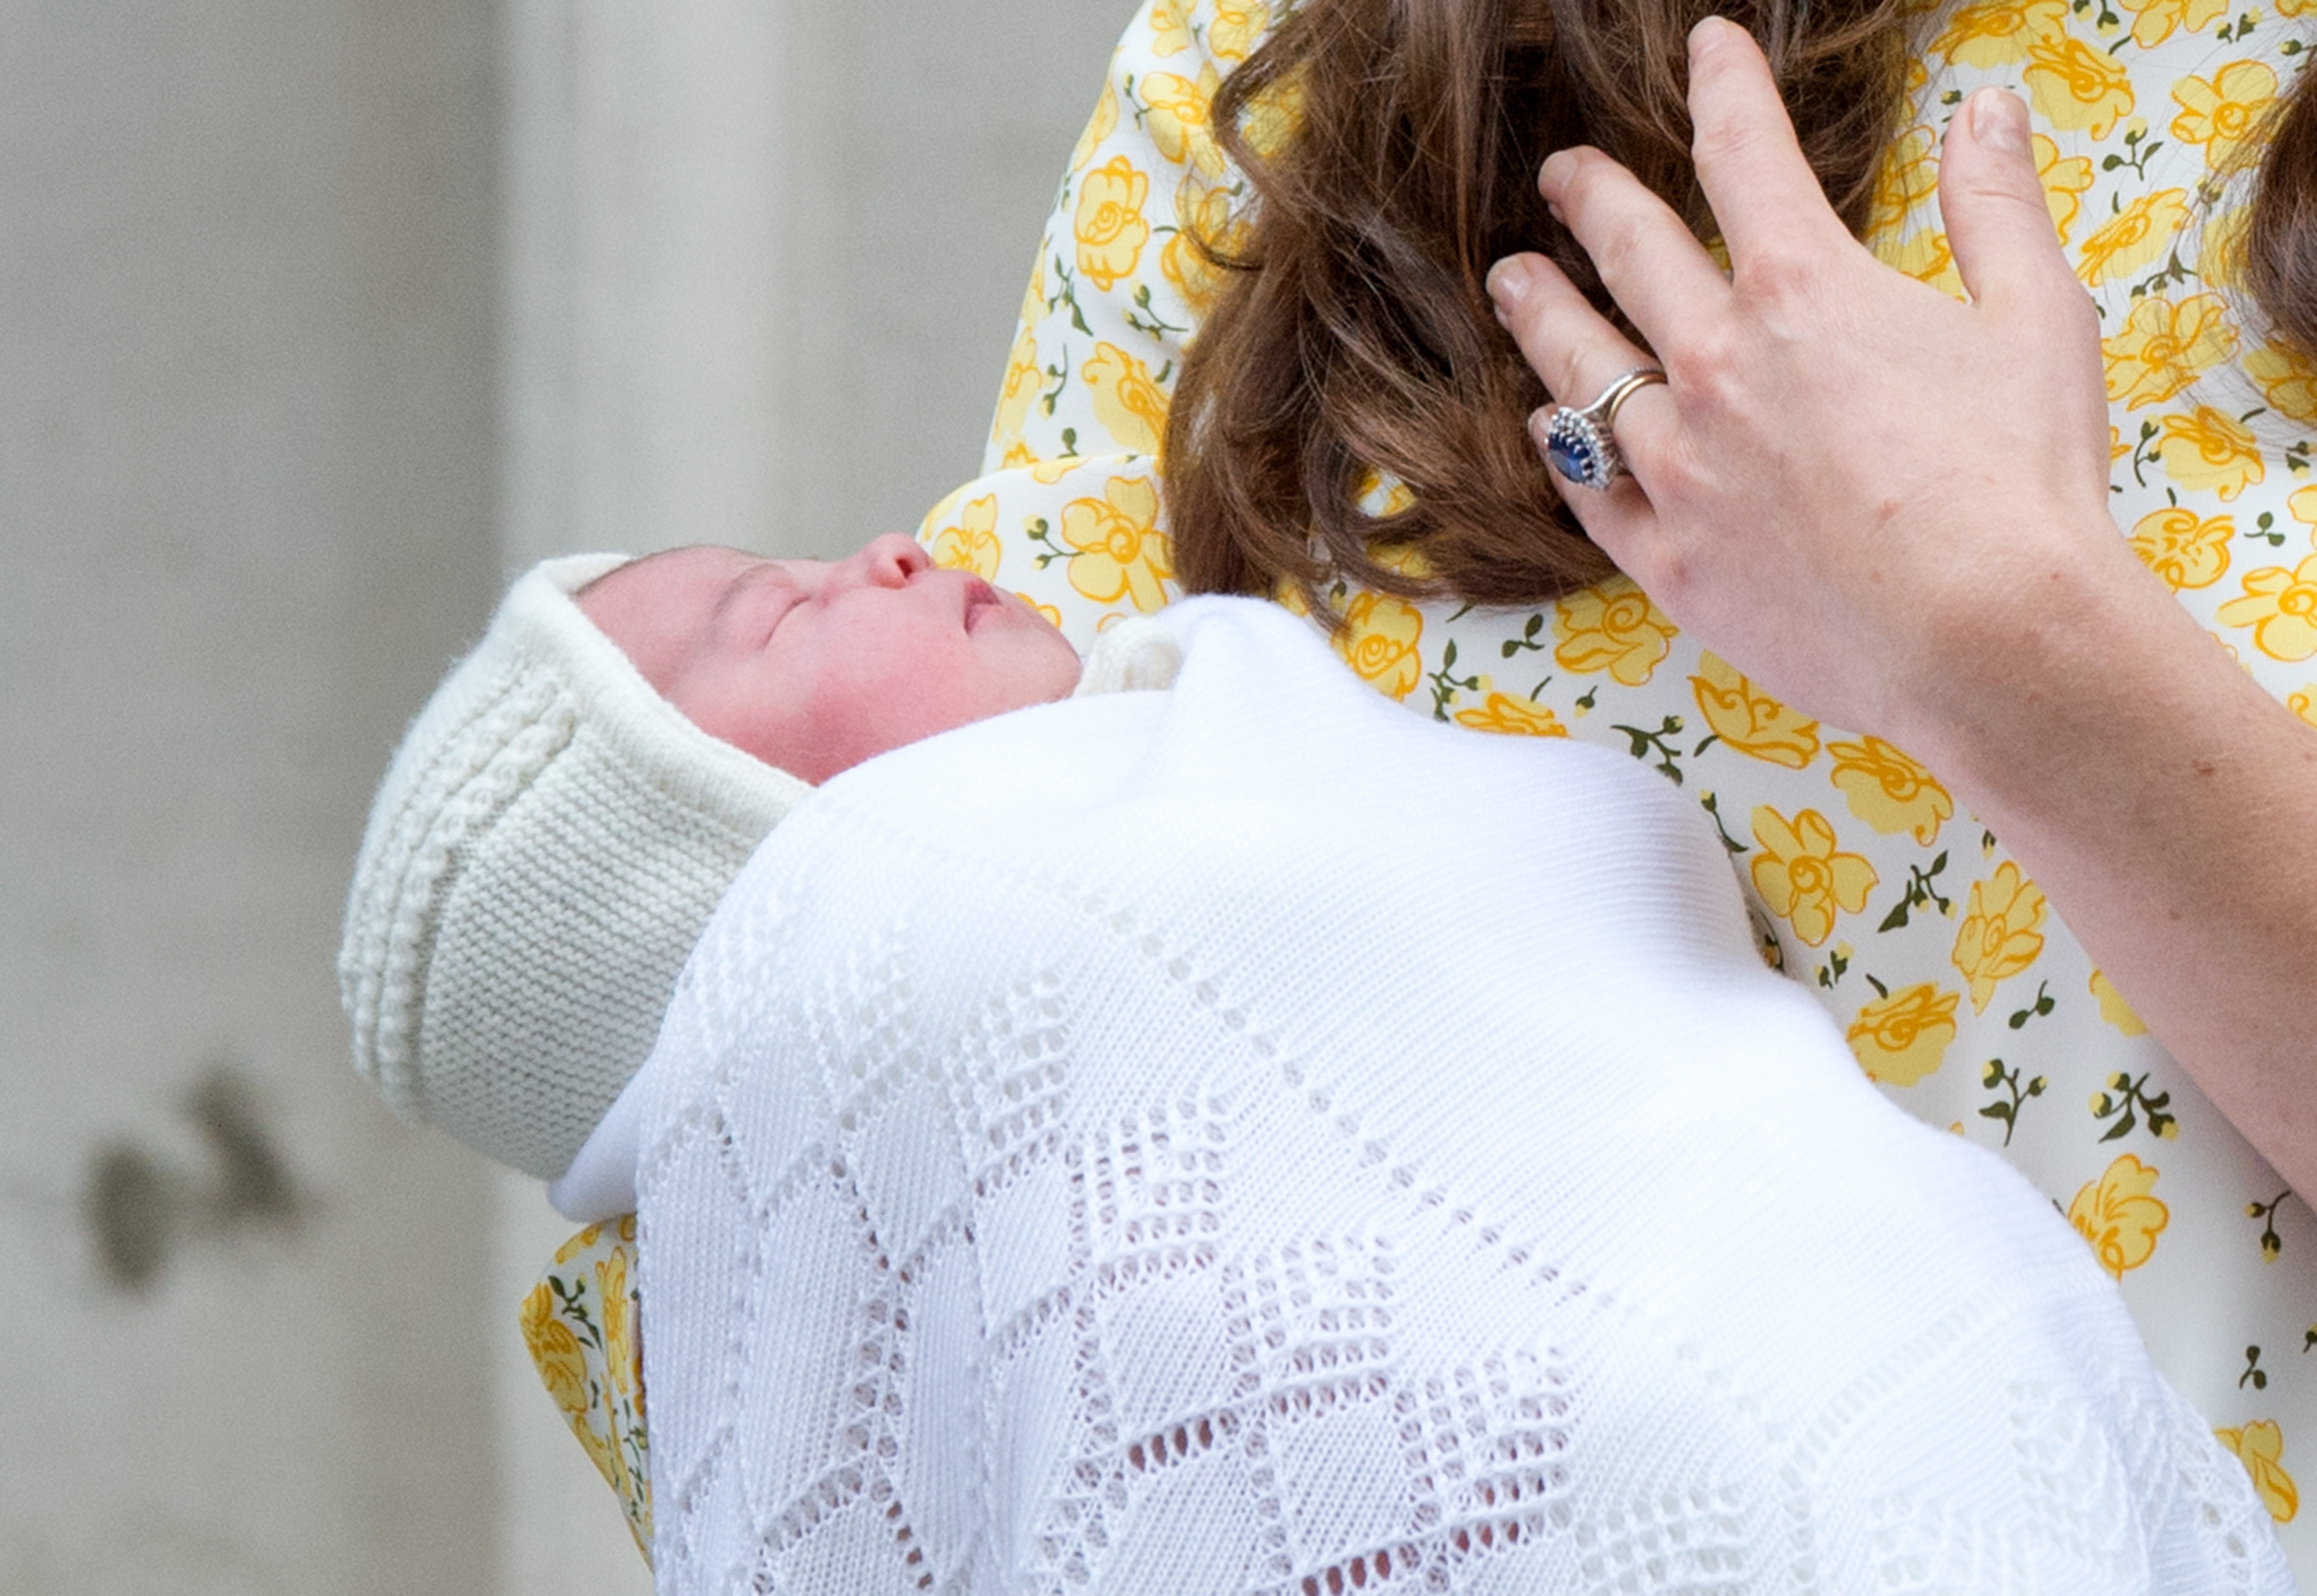 <p><a href="https://www.wonderwall.com/celebrity/profiles/overview/duchess-kate-1356.article">Duchess Kate</a> revealed newborn Princess Charlotte's sweet face to the world for the first time as they left the Lindo Wing at St. Mary's Hospital in London on May 2, 2015.</p>